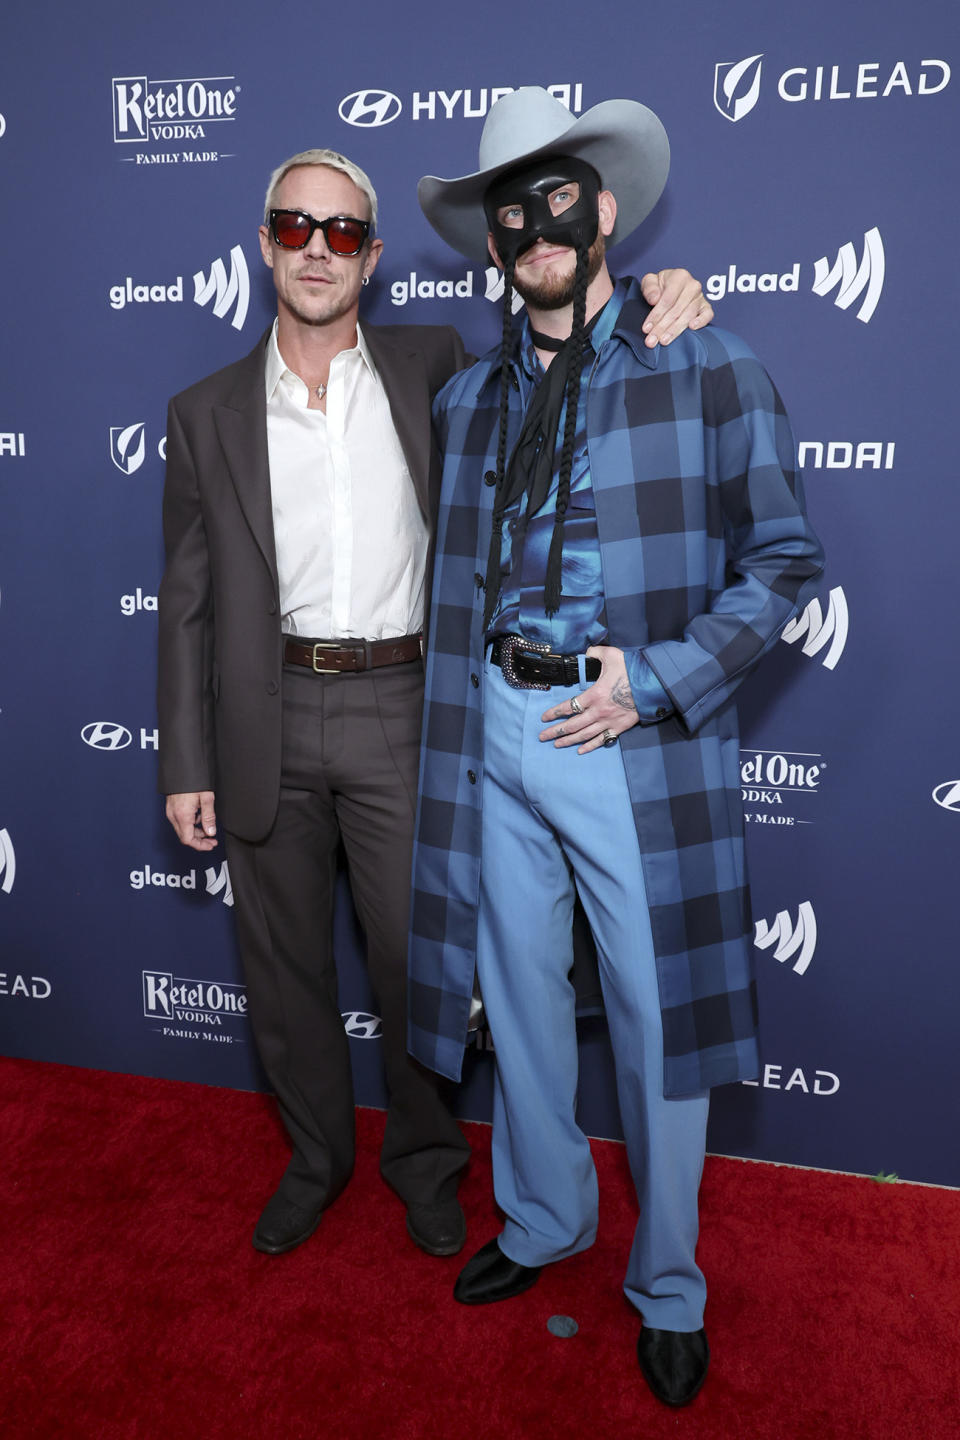 <p>BEVERLY HILLS, CALIFORNIA – MARCH 30: (L-R) Diplo and Orville Peck attend the GLAAD Media Awards at The Beverly Hilton on March 30, 2023 in Beverly Hills, California. (Photo by Randy Shropshire/Getty Images for GLAAD)</p>